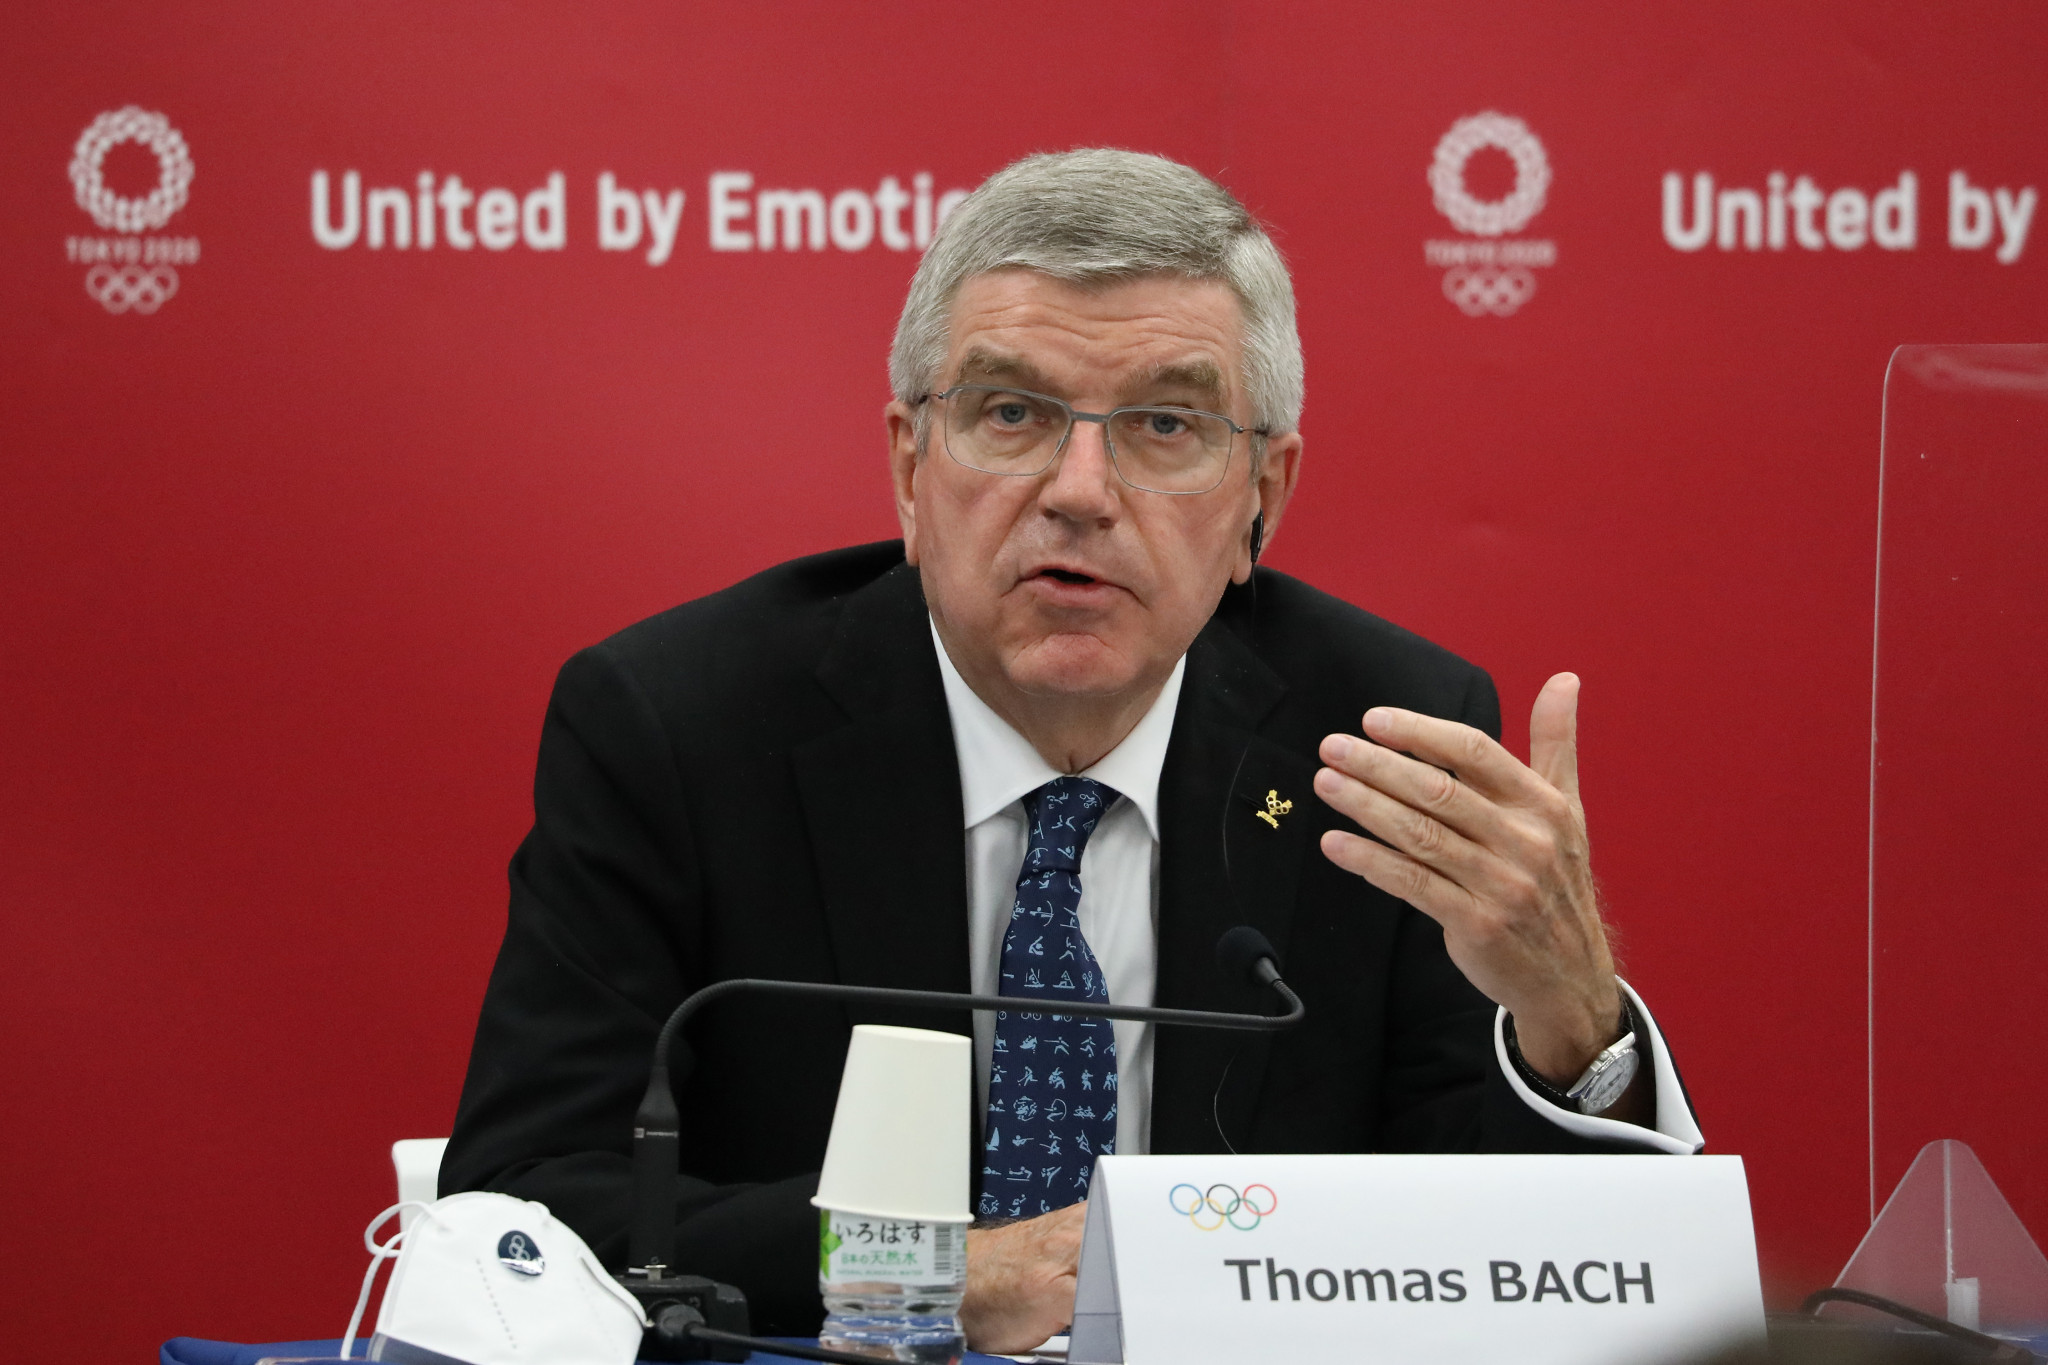 IOC President Thomas Bach will be re-elected this year but faces several challenging issues ©Getty Images